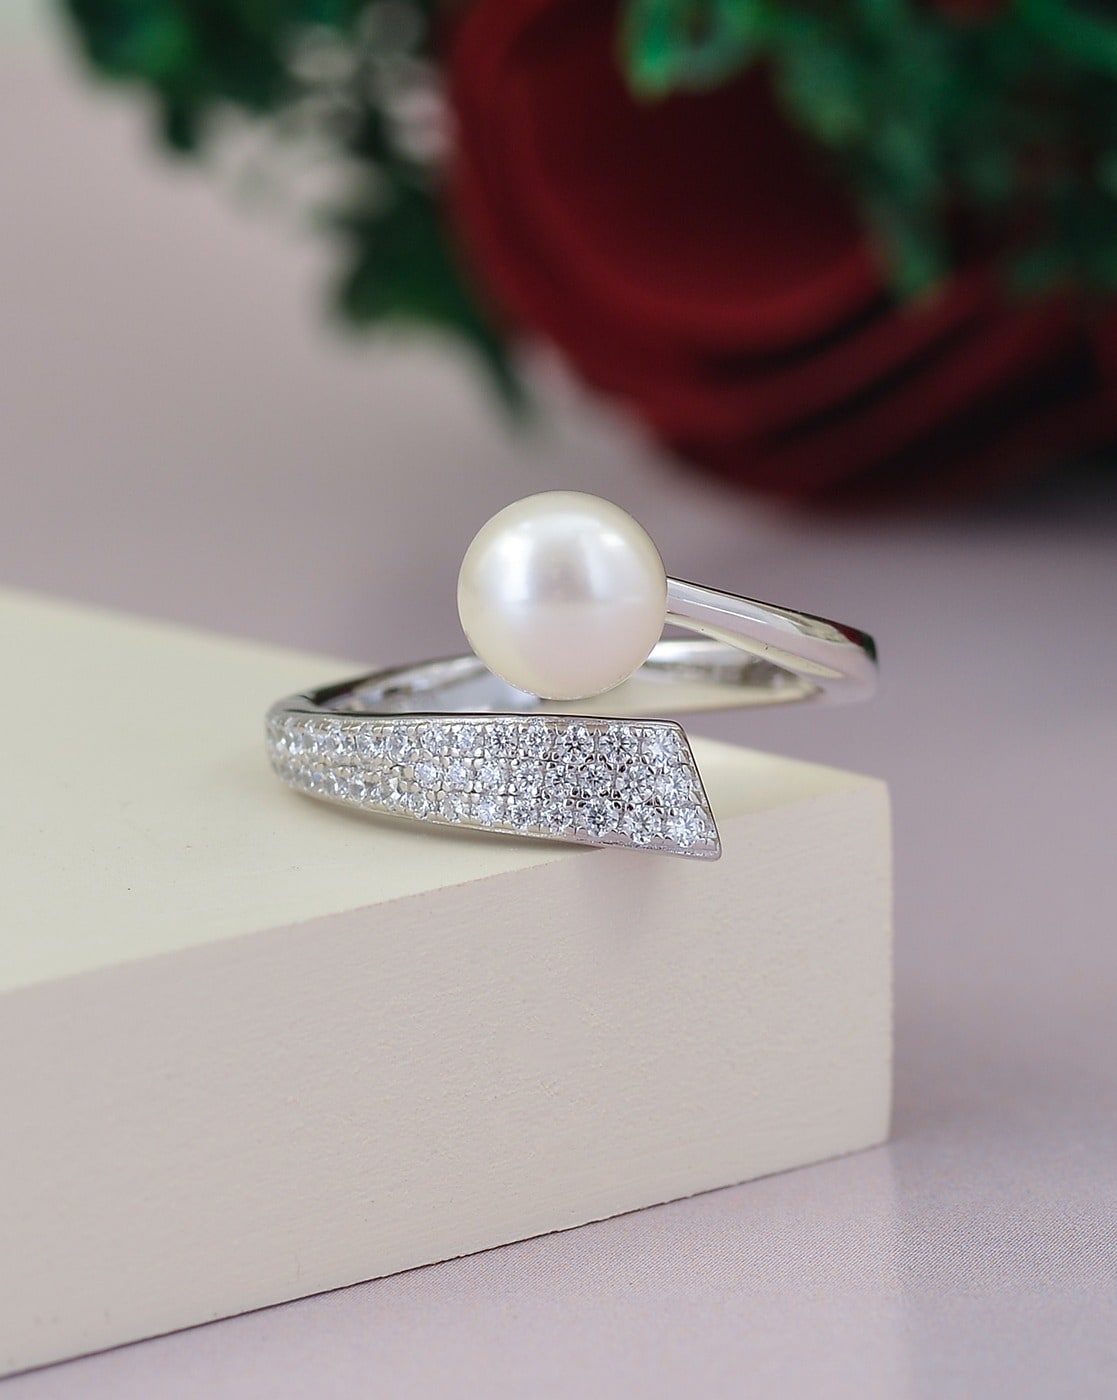 Natural Pearl Ring,92.5% Sterling Silver Ring, Silver Pearl Ring,gemstone  Ring,sterling Silver Ring,fresh Water Pearl Ring,silve Rring - Etsy